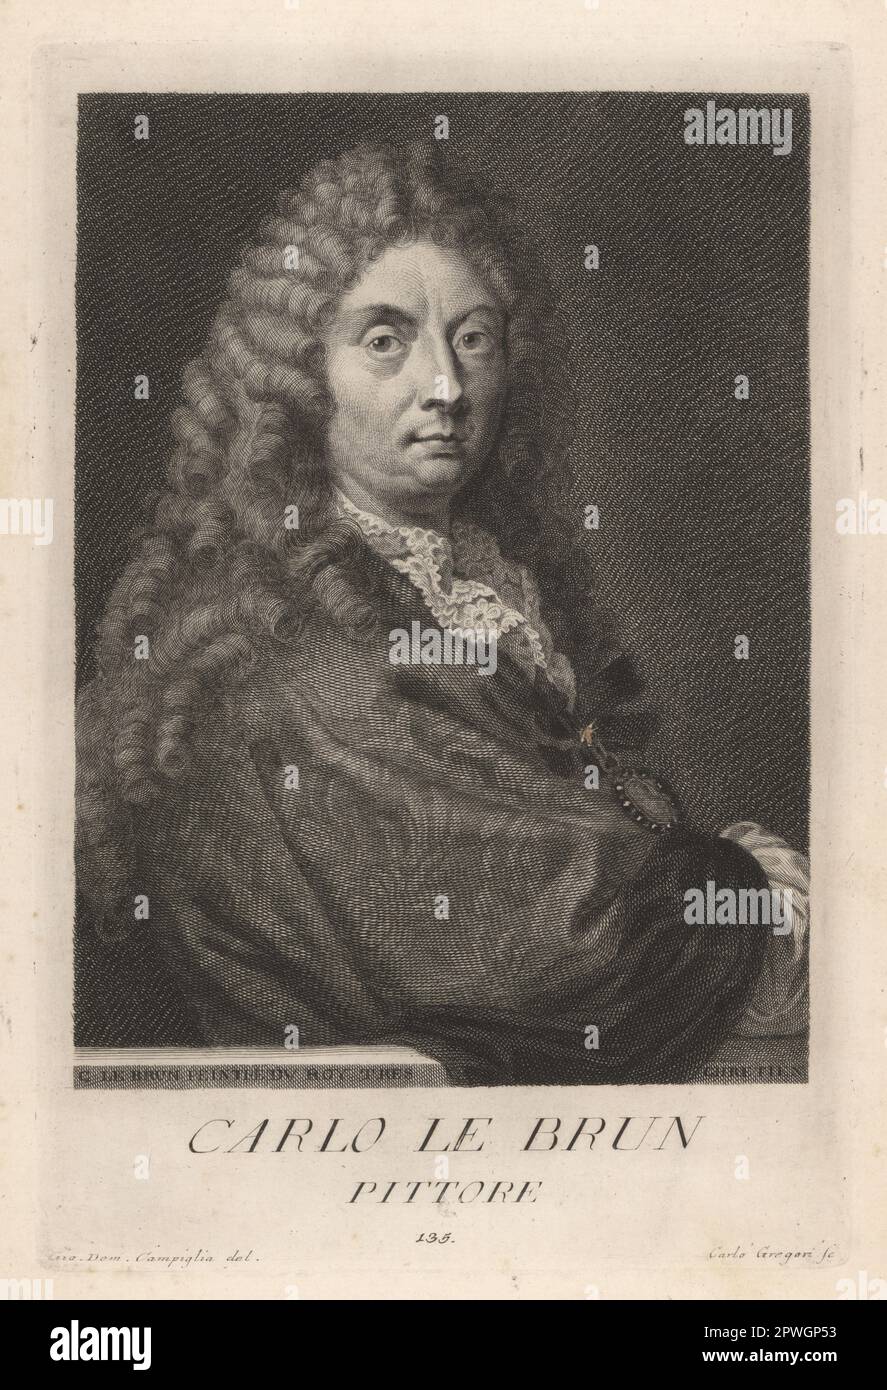 Charles Le Brun, French painter, physiognomist, art theorist, director of several art schools, and court painter to King Louis XIV, 1619-1690. Carlo le Brun, Pittore. Copperplate engraving by Carlo Gregori after Giovanni Domenico Campiglia after a self portrait by the artist from Francesco Moucke's Museo Florentino (Museum Florentinum), Serie di Ritratti de Pittori (Series of Portraits of Painters) stamperia Mouckiana, Florence, 1752-62. Stock Photo